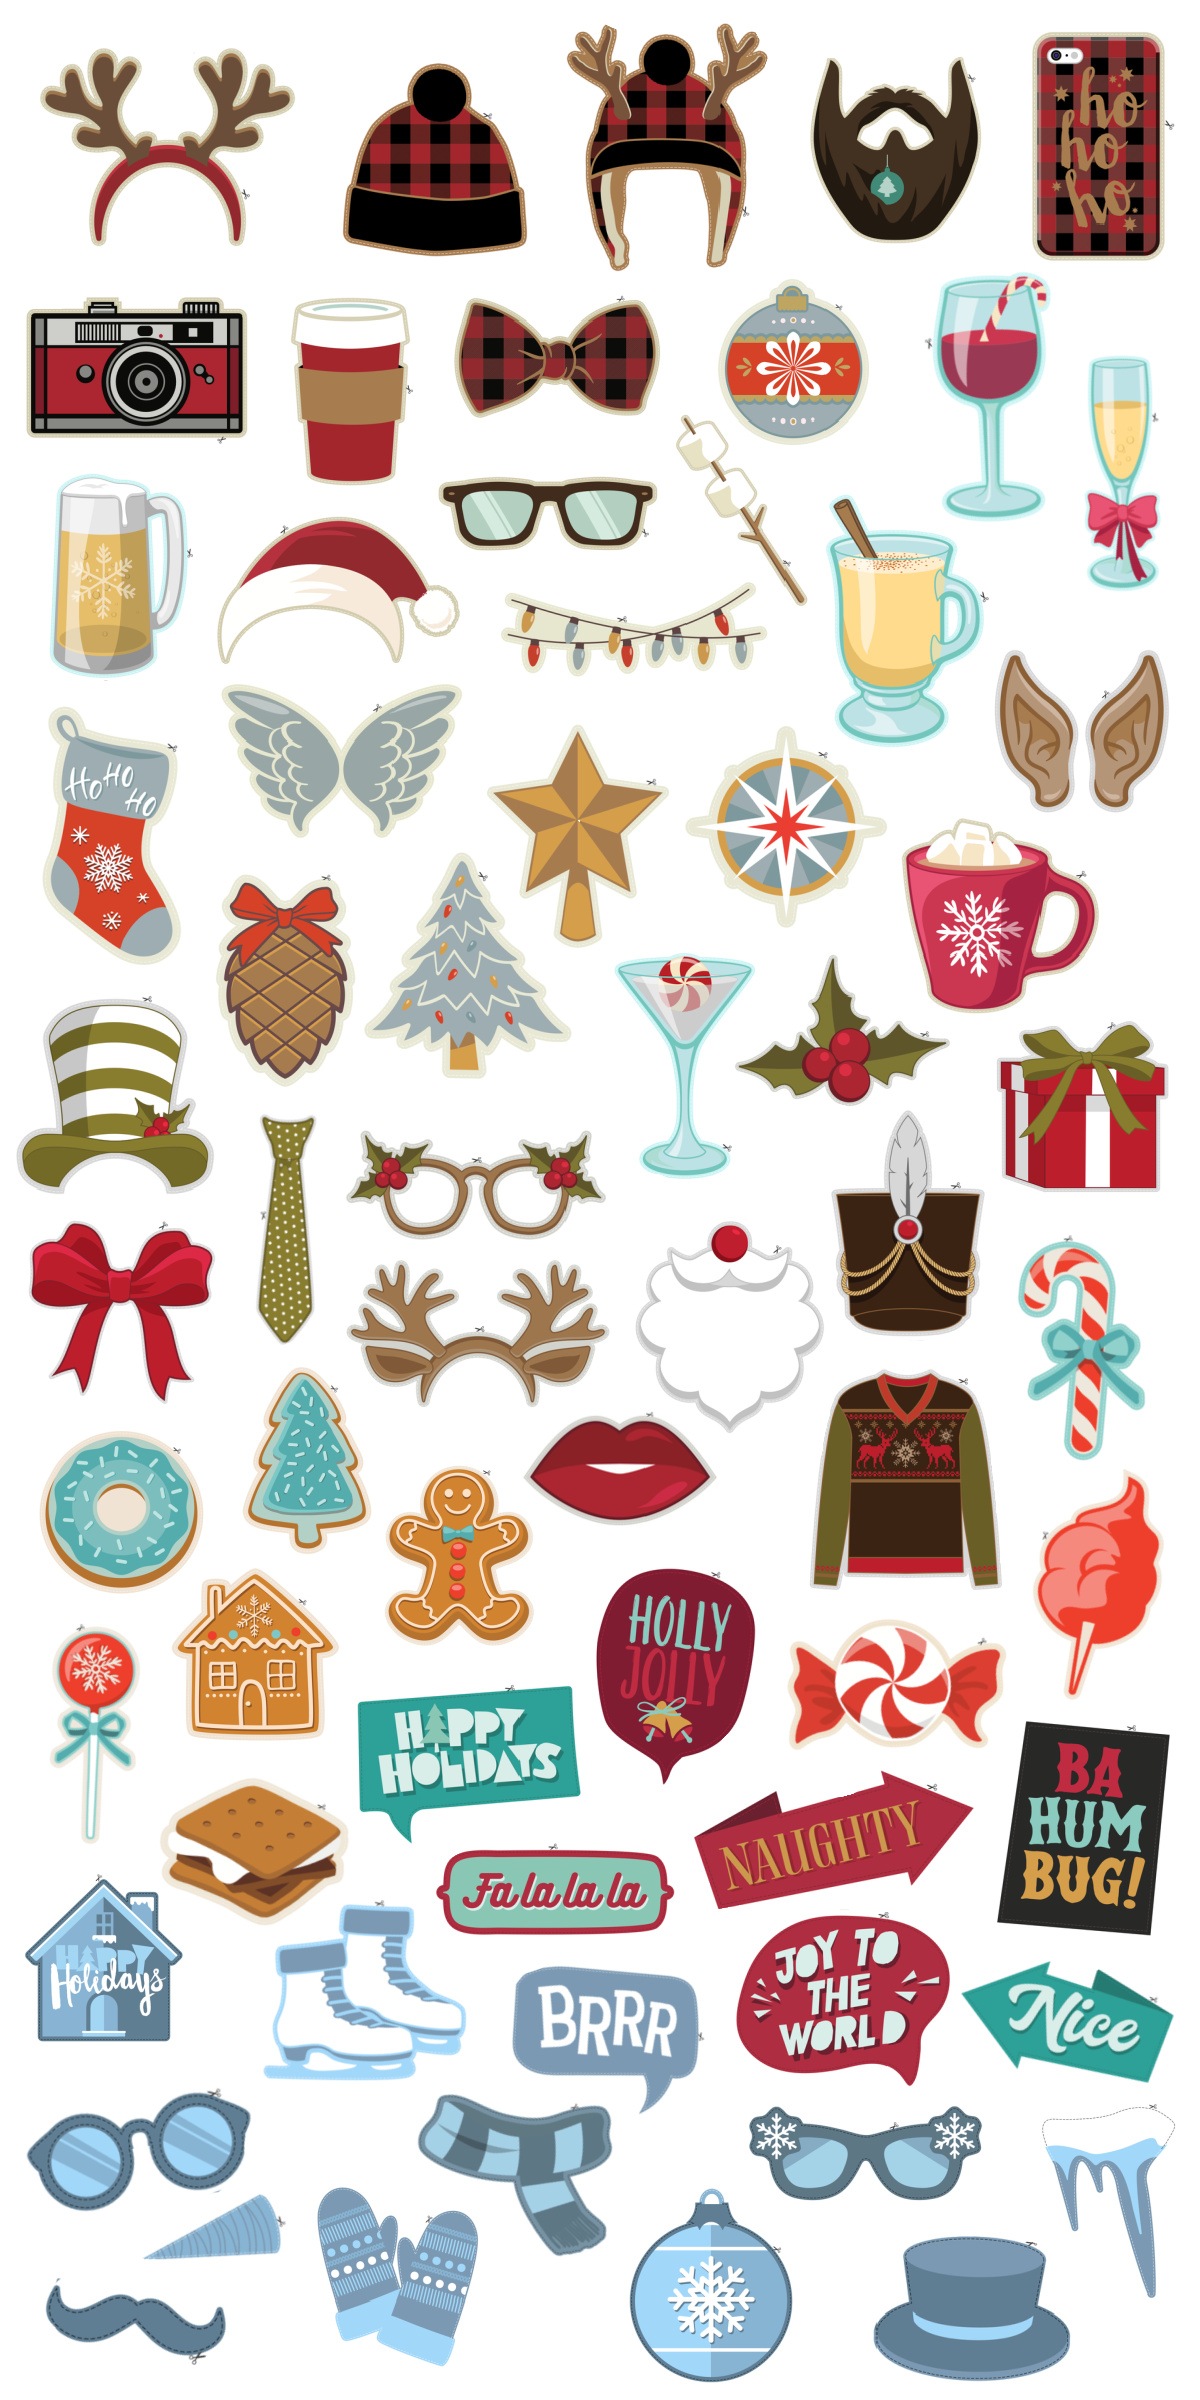 Download All Our 65 Fun FREE Printable Christmas Photo Booth Props Now!